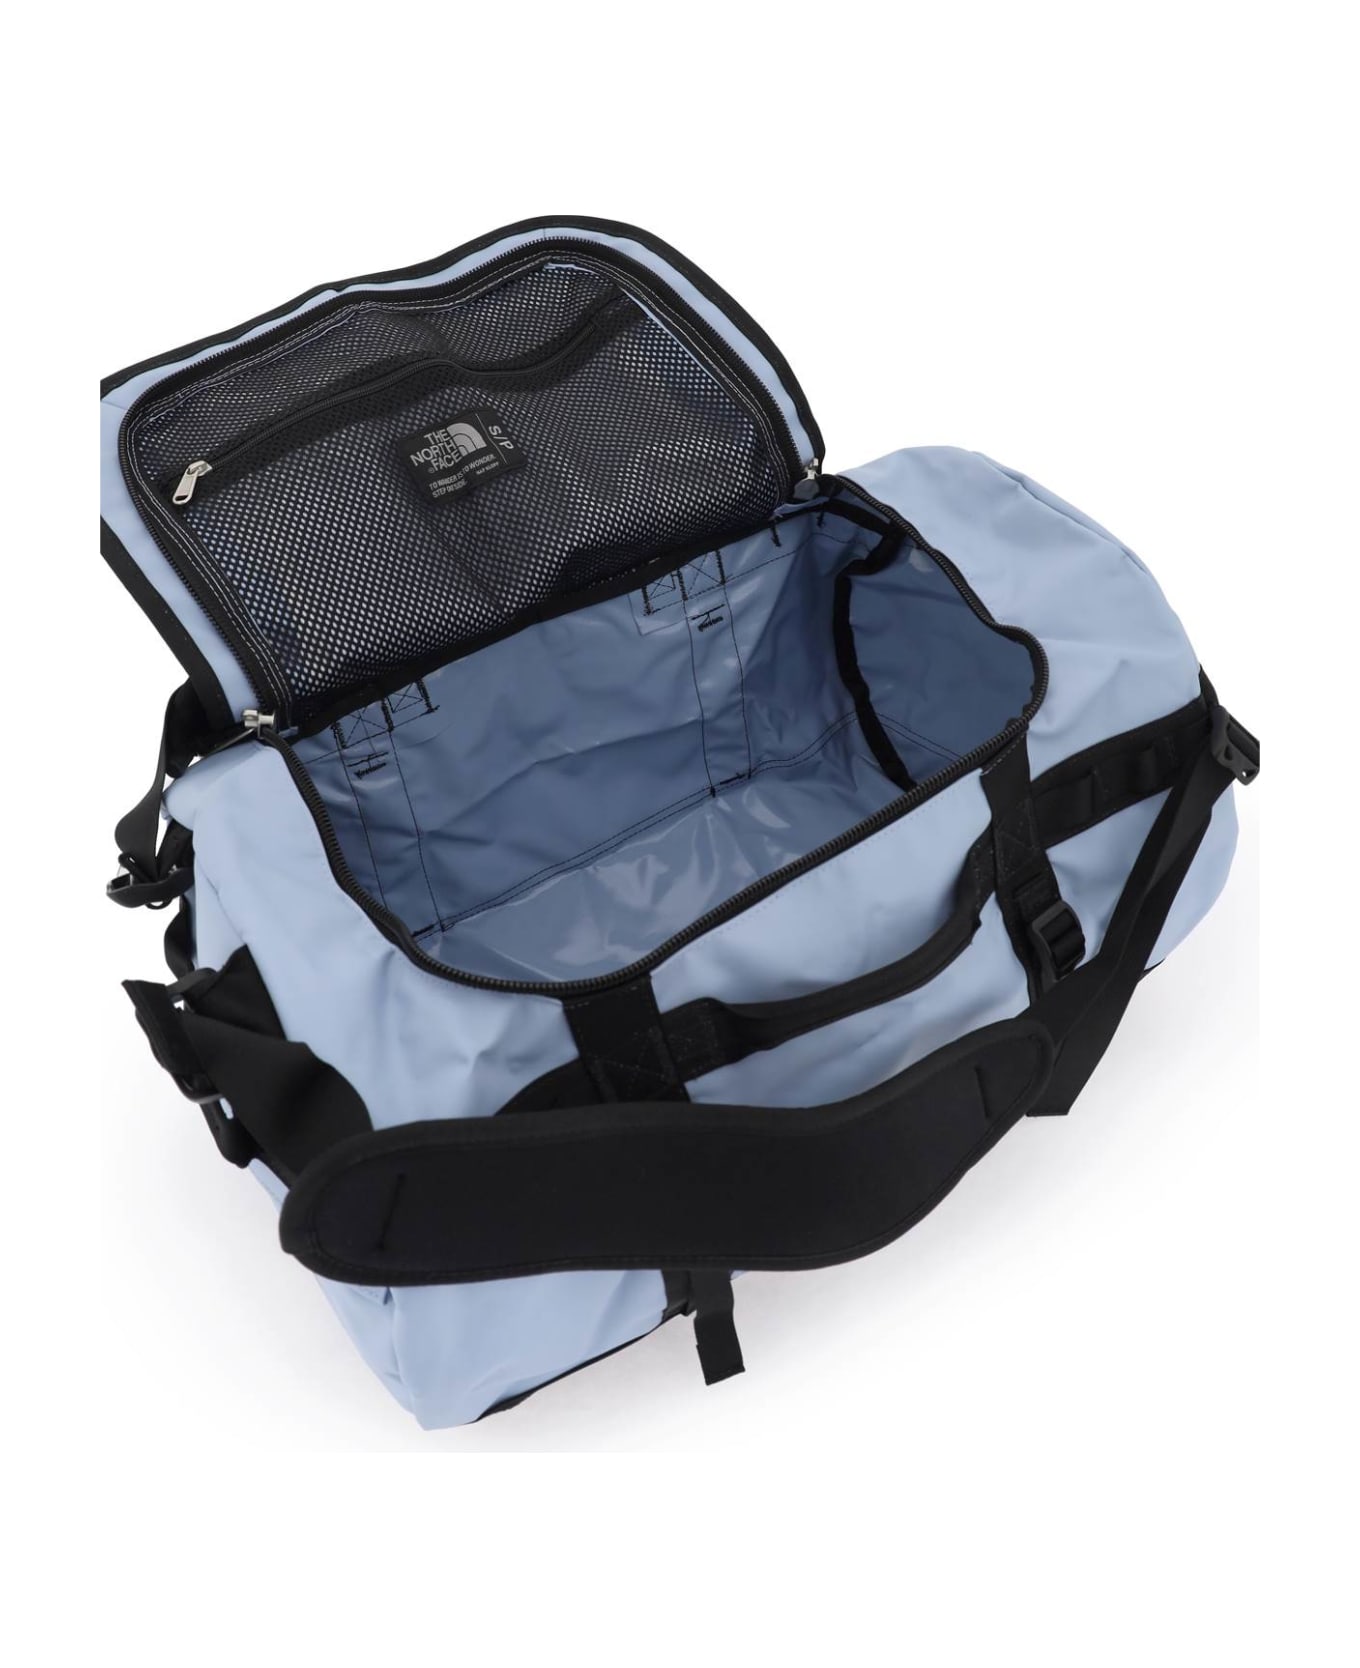 The North Face Small Base Camp Duffel Bag - STEEL BLUE TNF BLACK (Light blue)